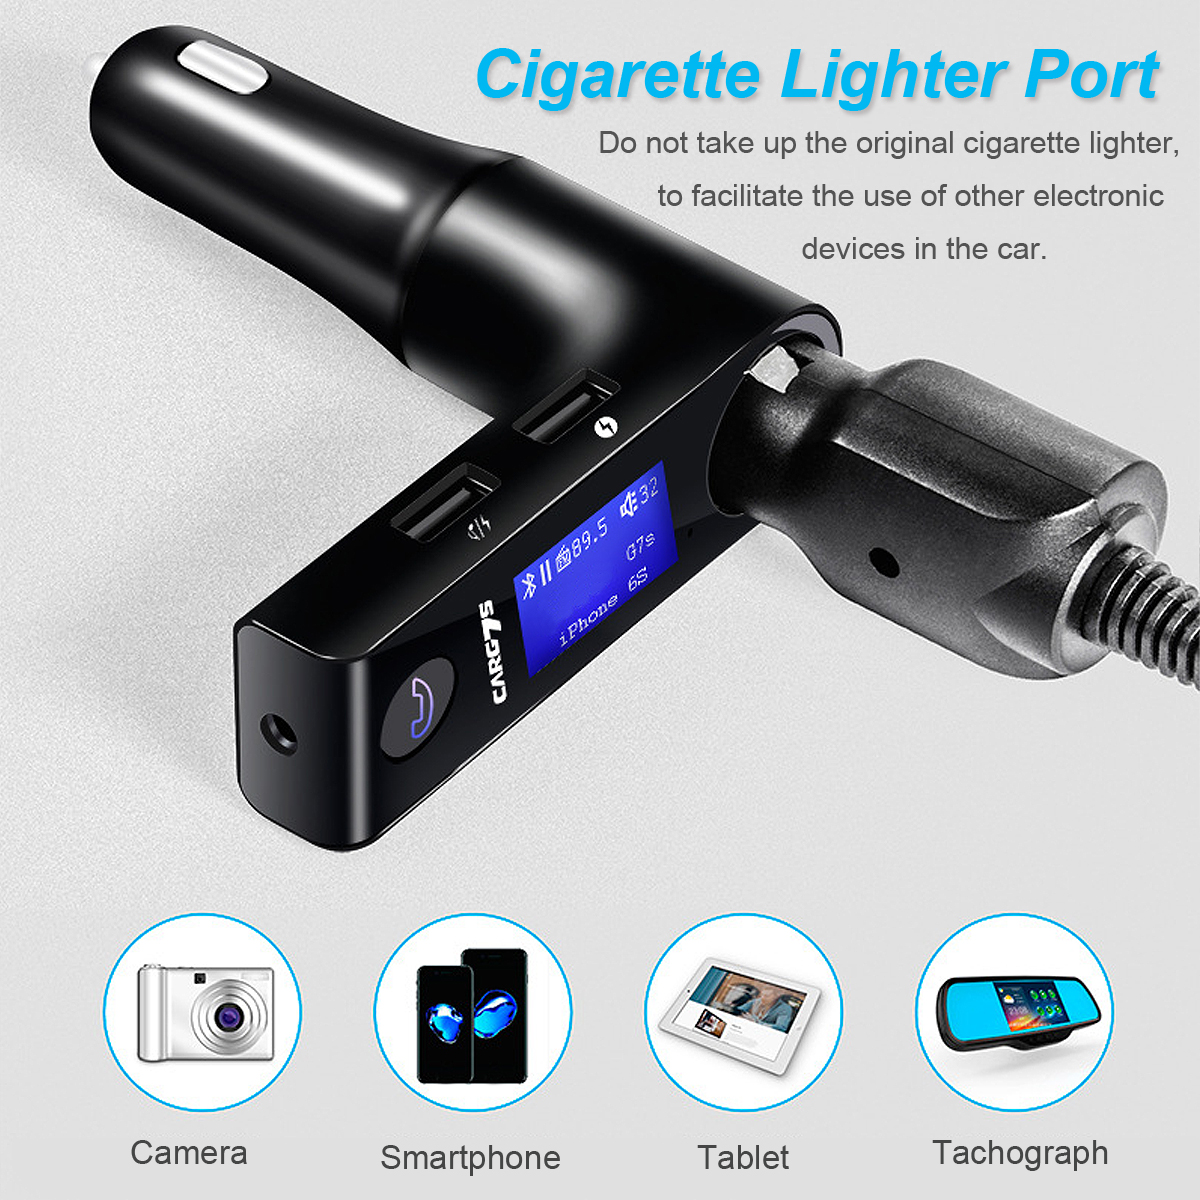 G7S 12-24V bluetooth Car FM Transmitter Wireless Radio Adapter USB Charger MP3 Player